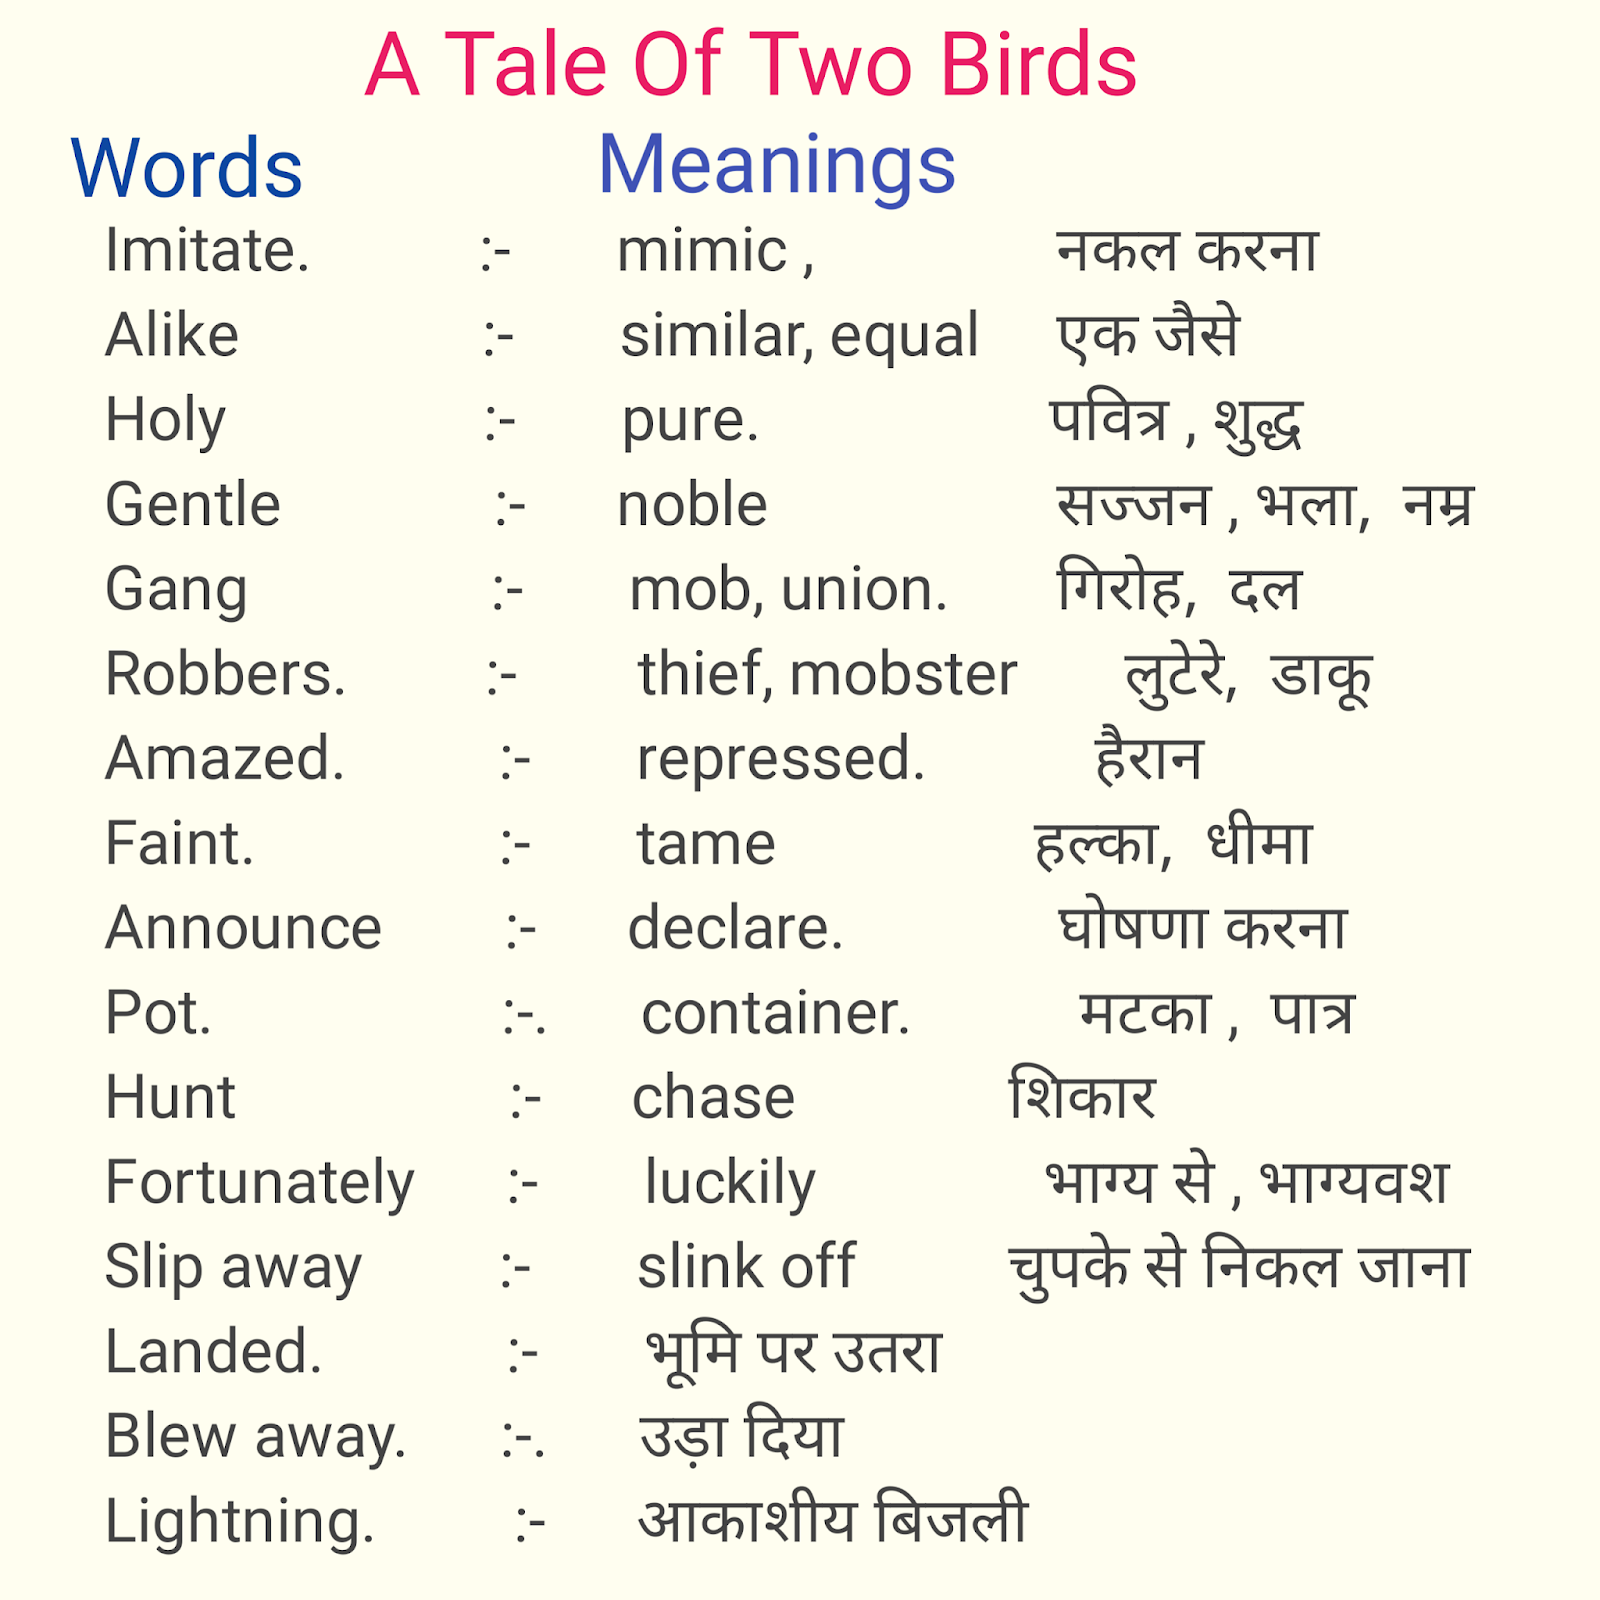 class-6-english-chapter-1-question-answer-a-tale-of-two-birds